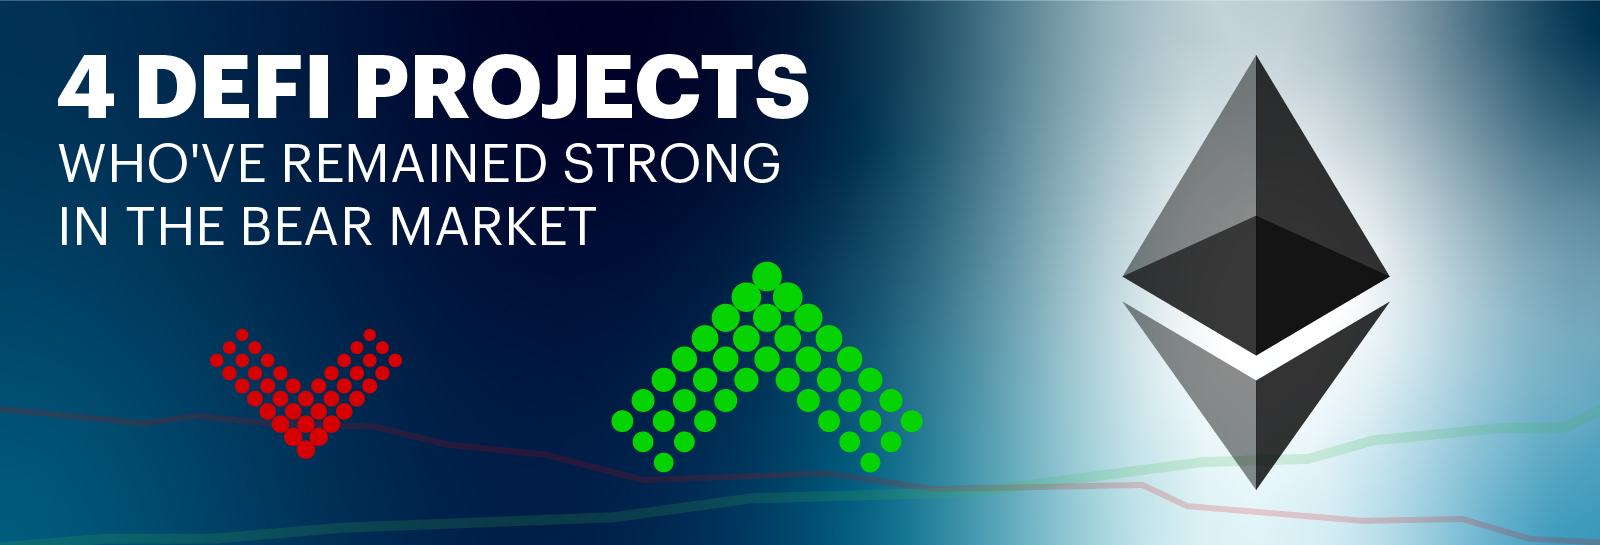 Blog banner for 4 DeFi projects who remain strong in the bear market